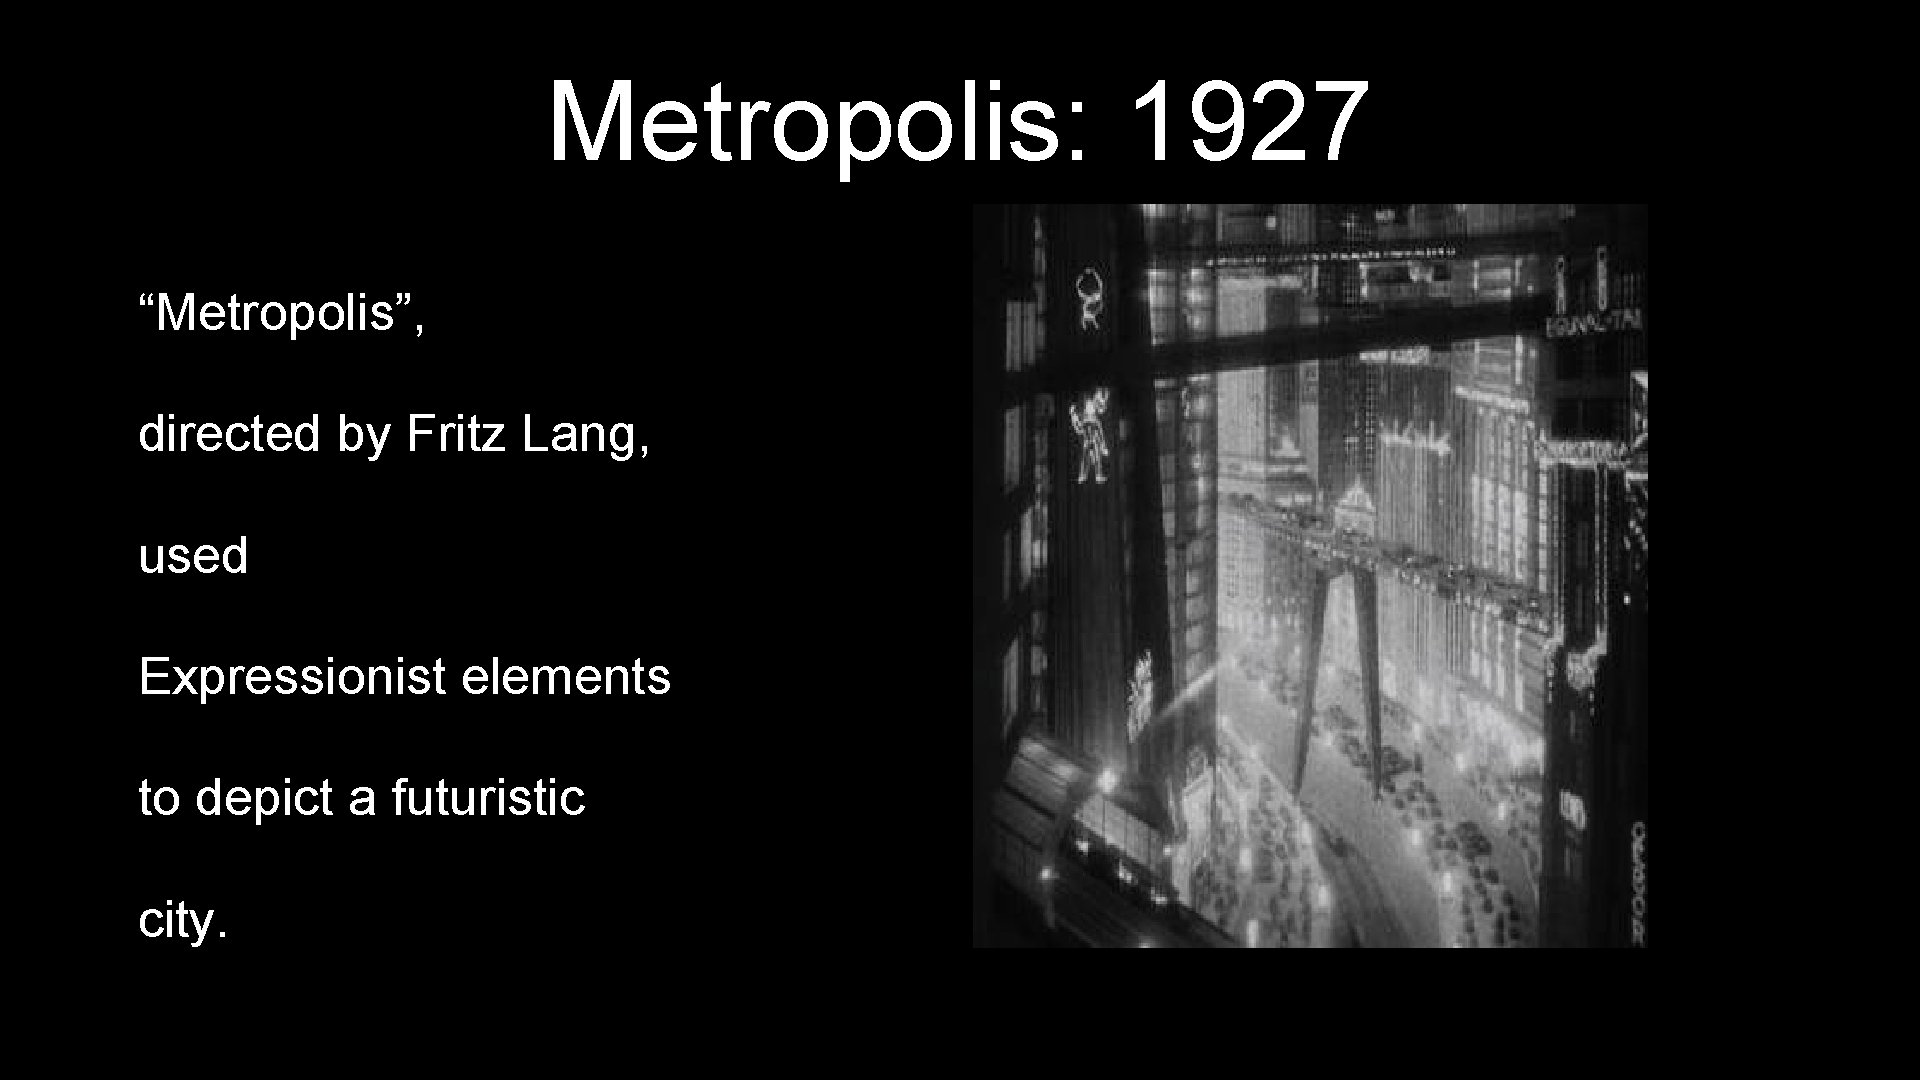 Metropolis: 1927 “Metropolis”, directed by Fritz Lang, used Expressionist elements to depict a futuristic